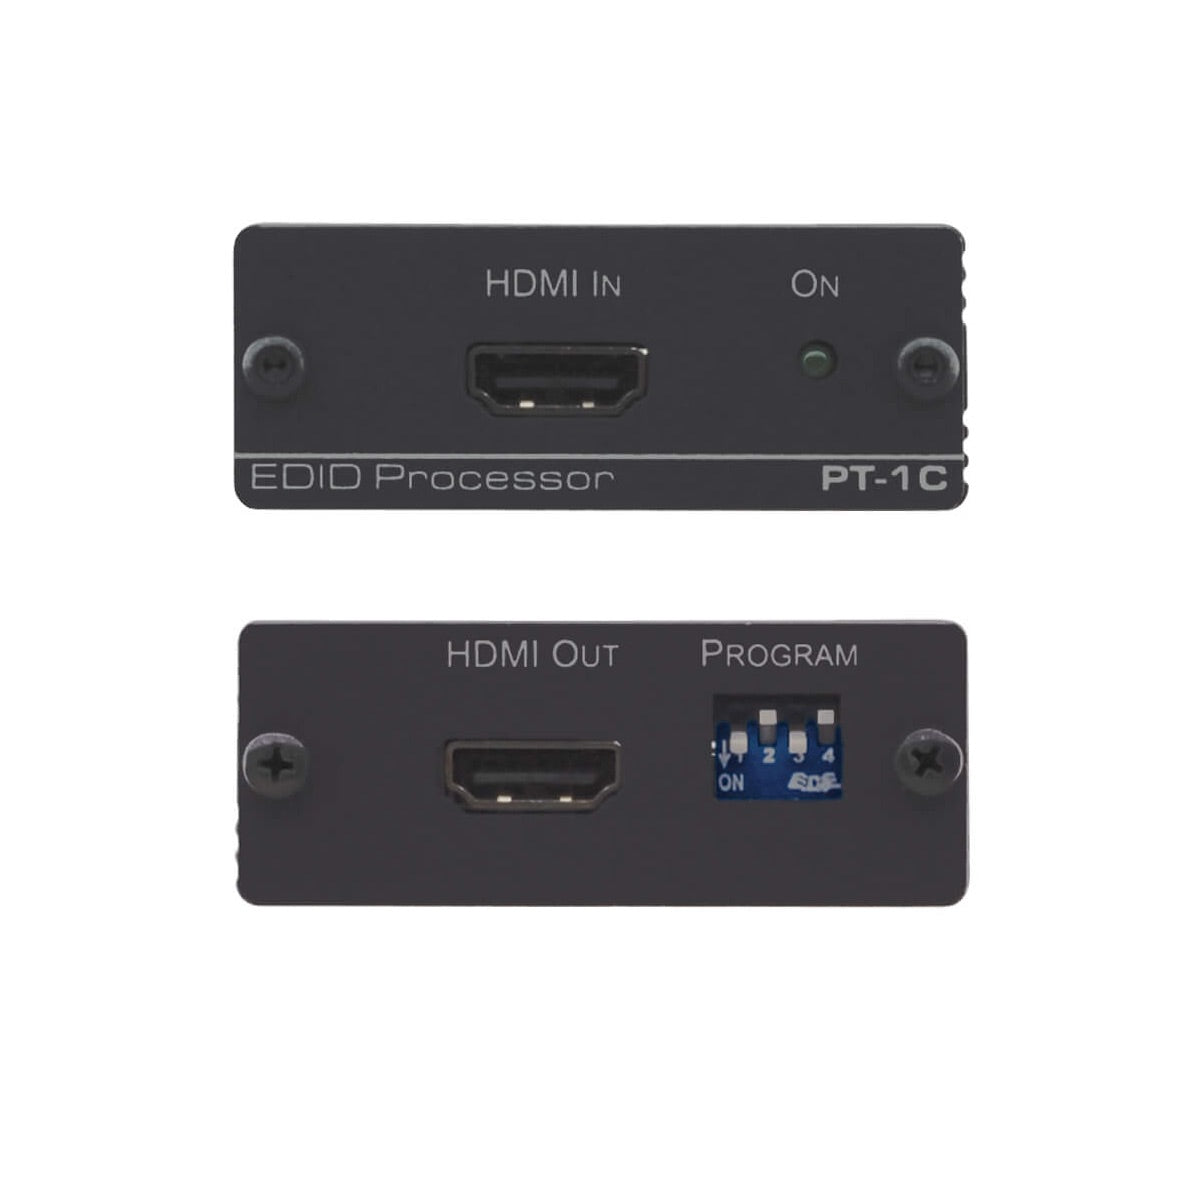 Kramer PT-1C - EDID Processor for HDMI Signals, front and rear views